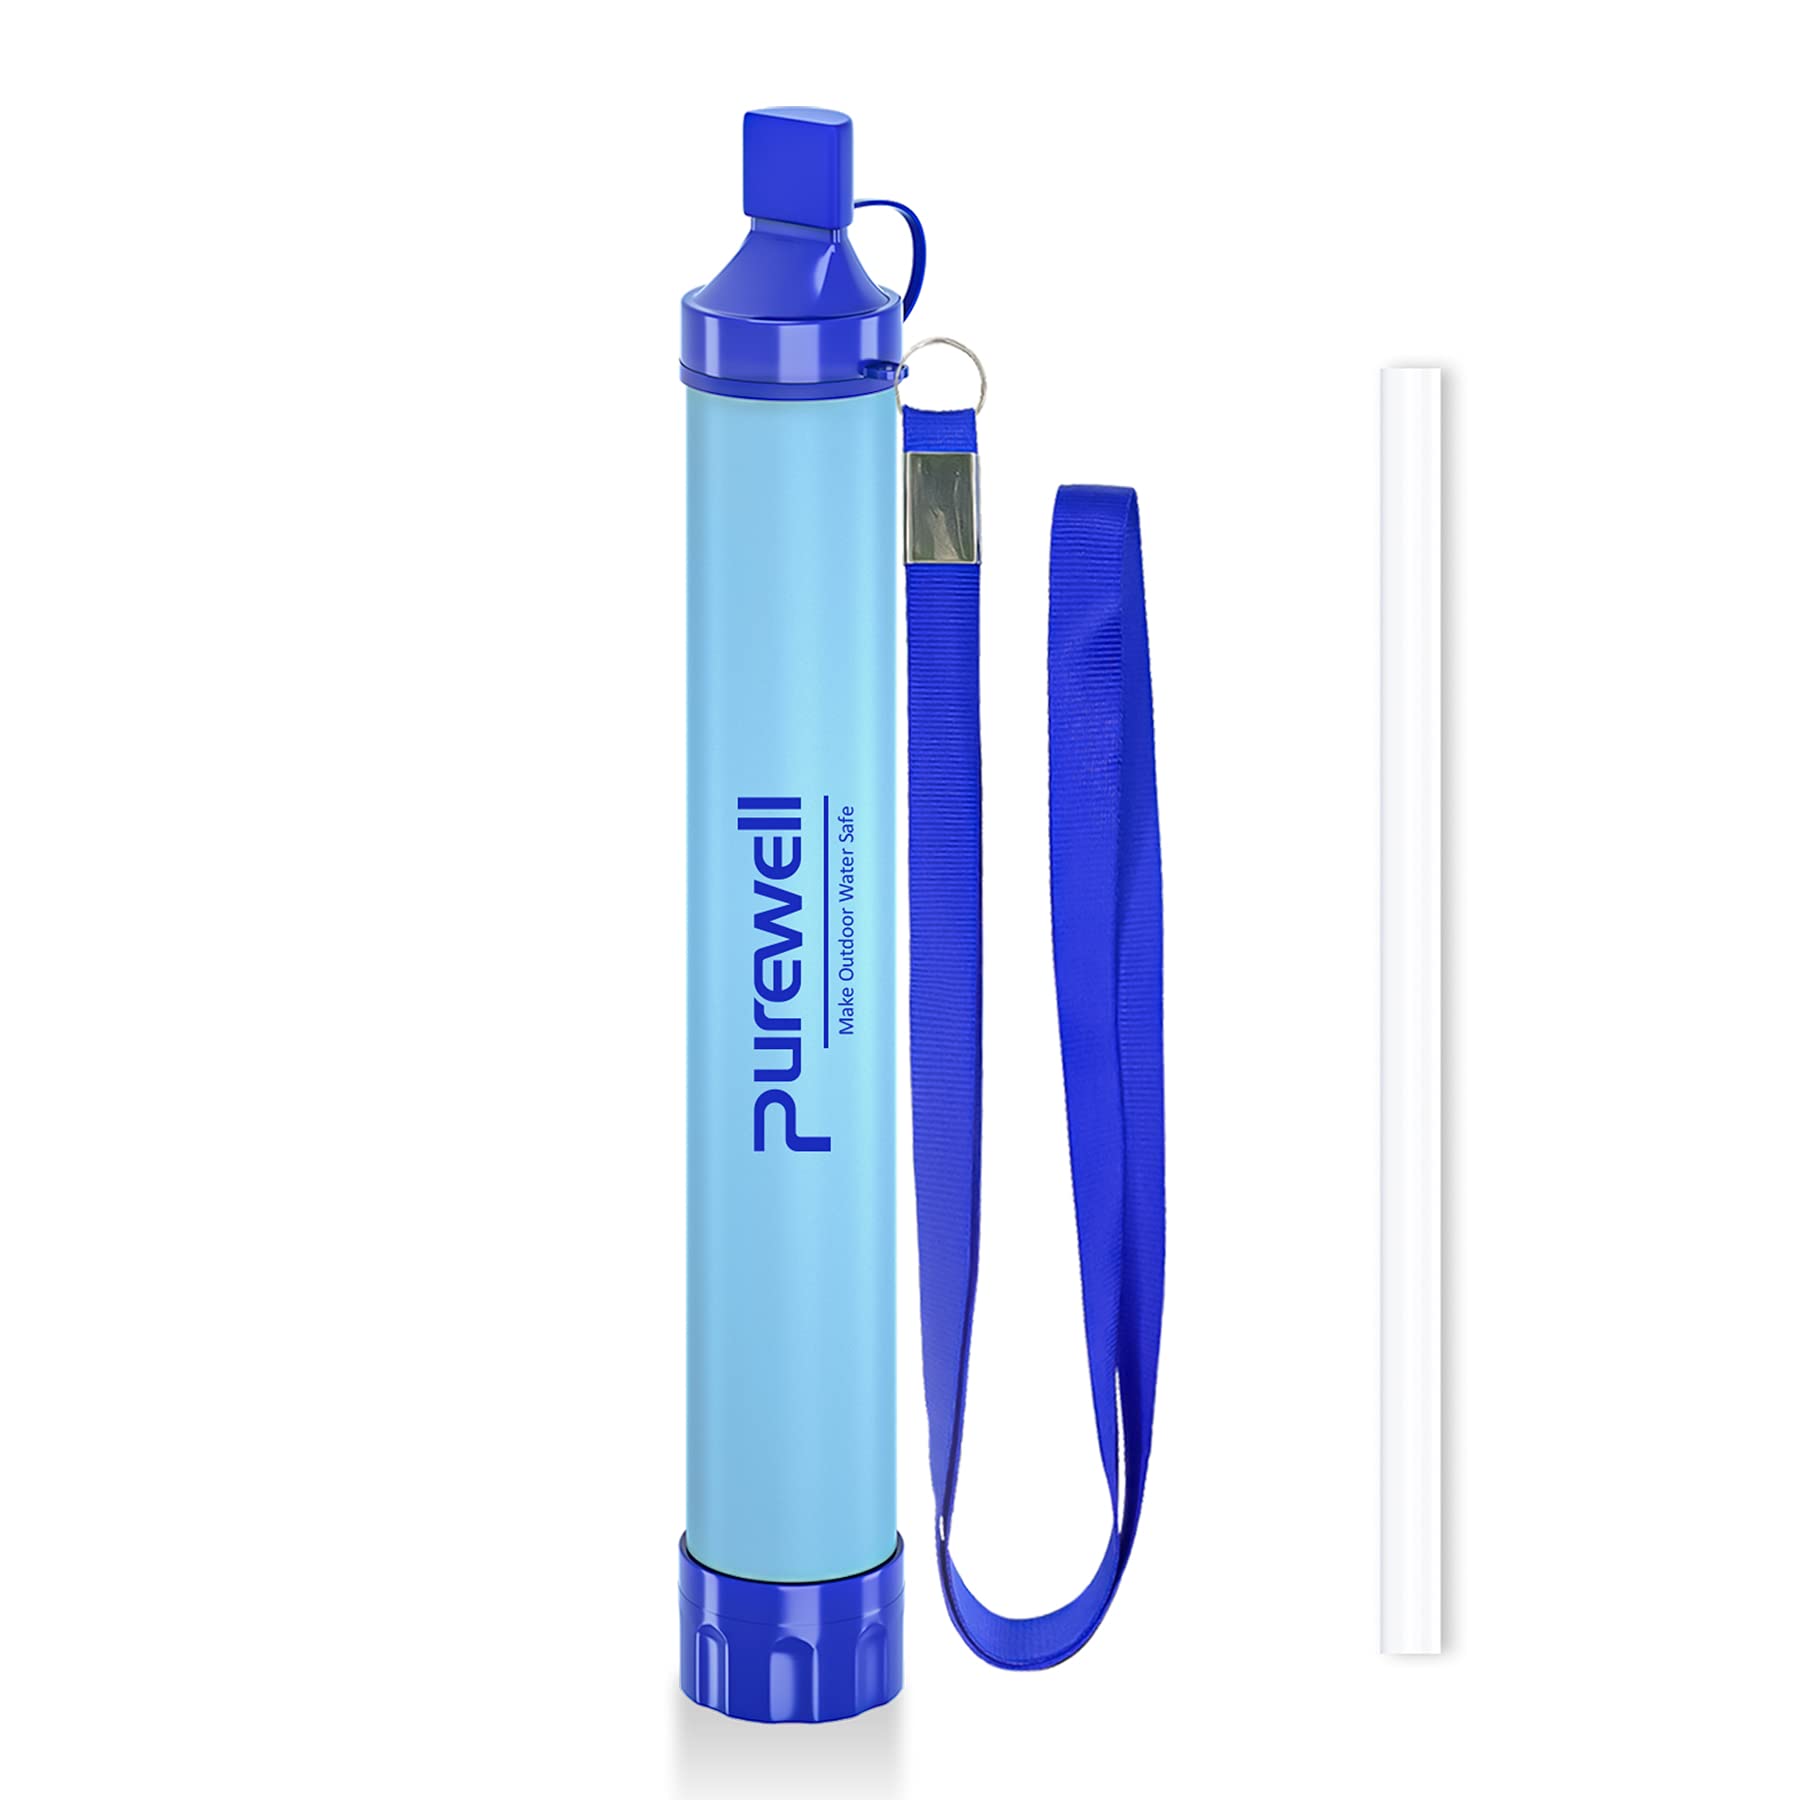 Purewell Outdoor Water Filter Personal Water Filtration Straw Emergency  Survival Gear Water Purifier for Camping Hiking Climbing Backpacking 1